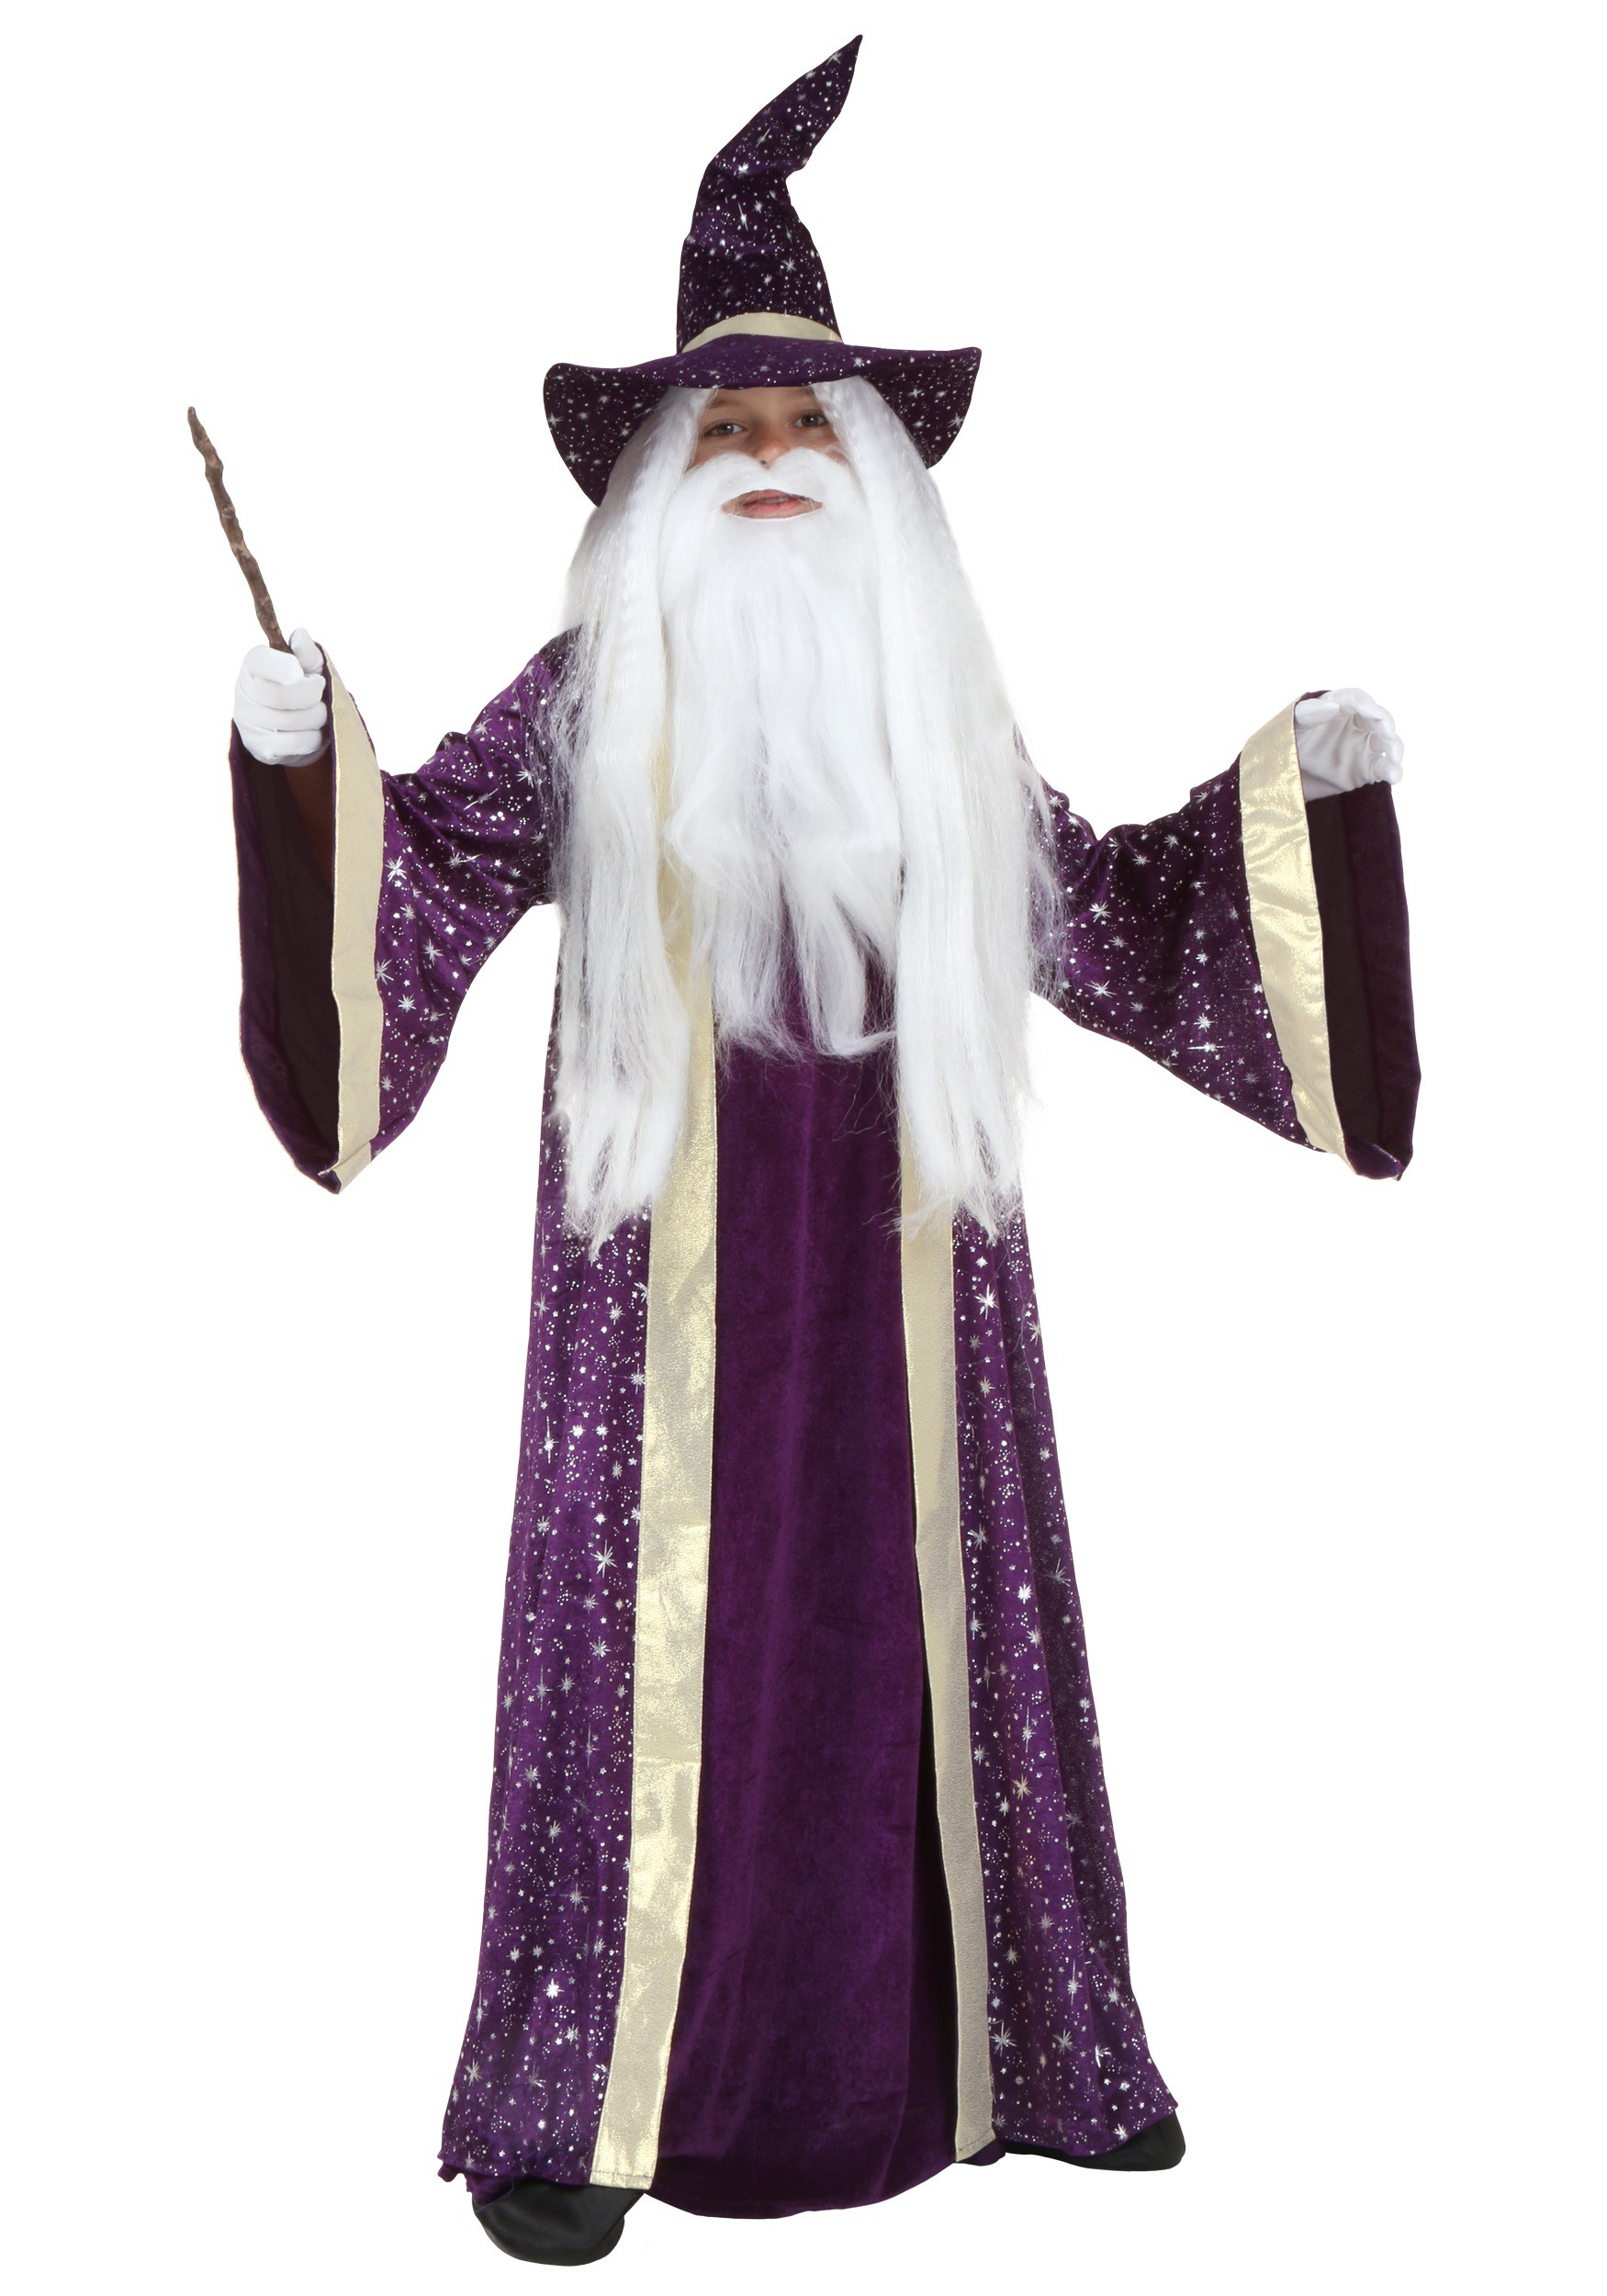 Halloween Party Costumes Wizard Themed Party Costumes, Wizard Robe for 2-15 Years Old Girls and Boys Kleding Unisex kinderkleding pakken 